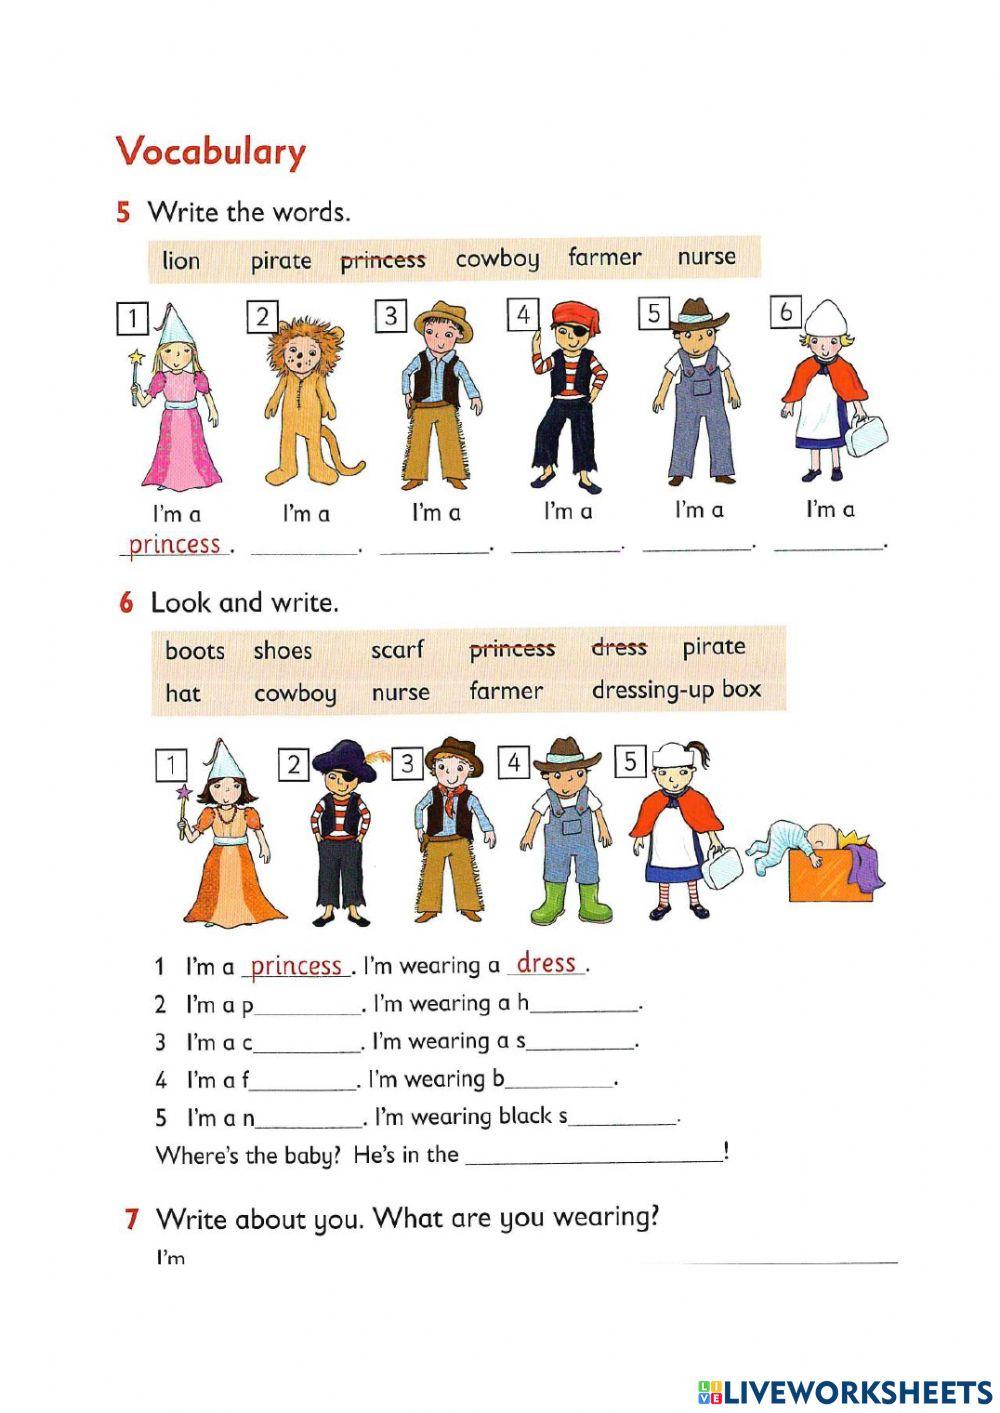 Reading and writing - Let-s dress up!